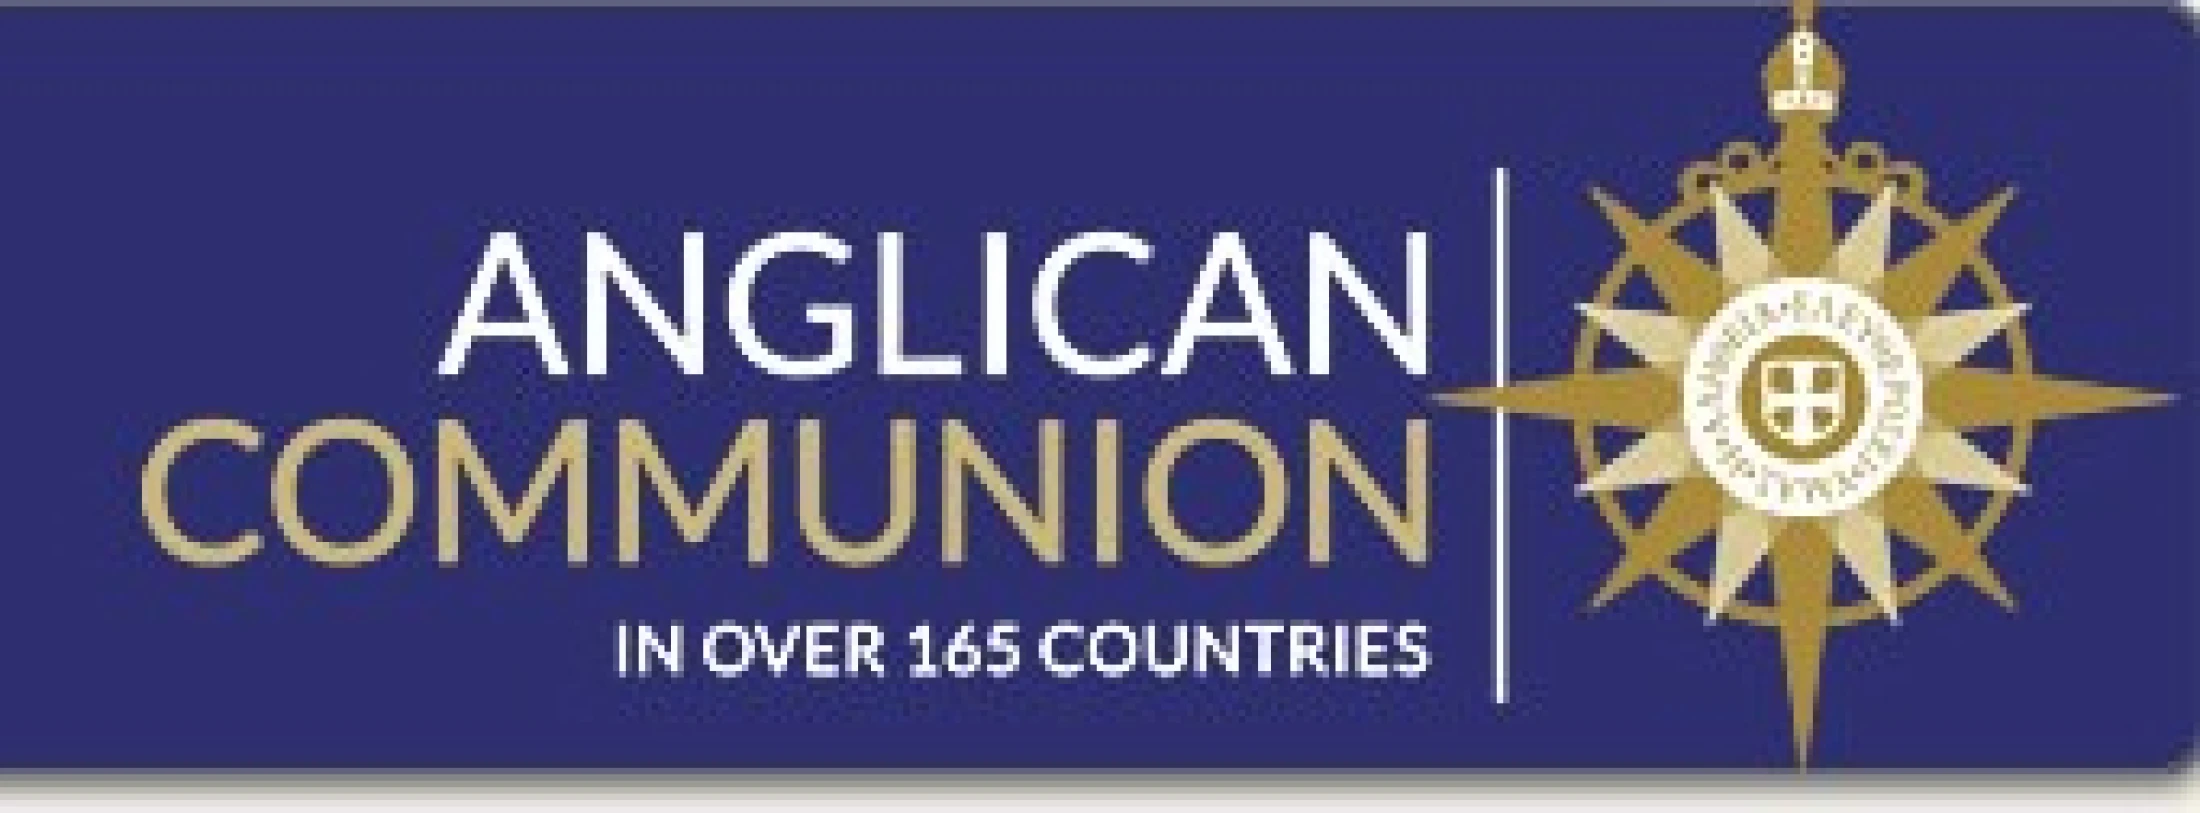 Anglican Communion Office publishes its first Annual Review